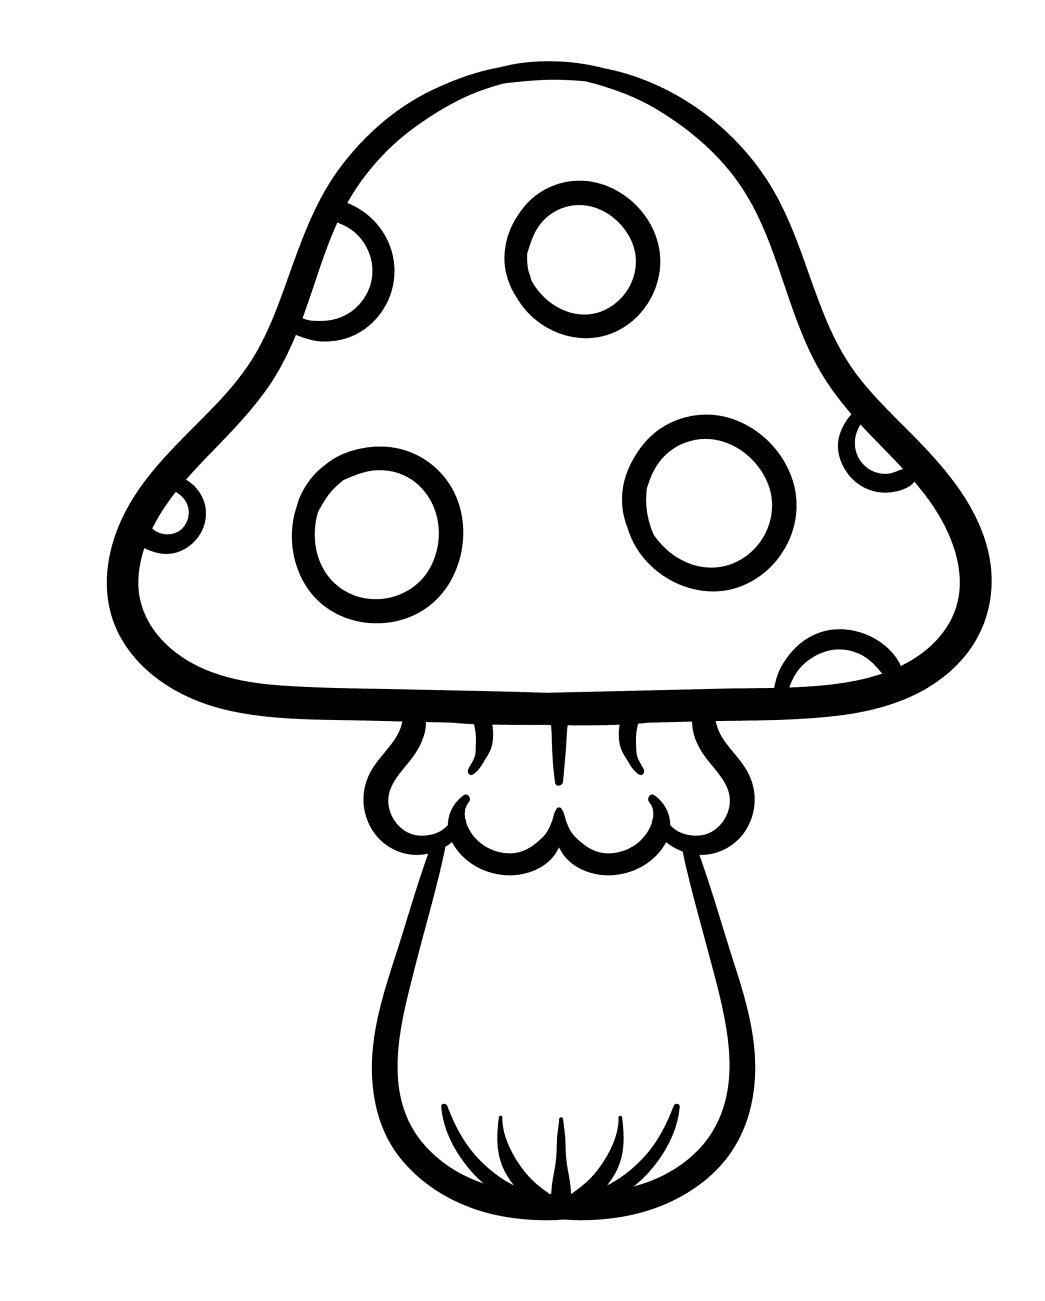 Mushroom for Childrens Coloring Page